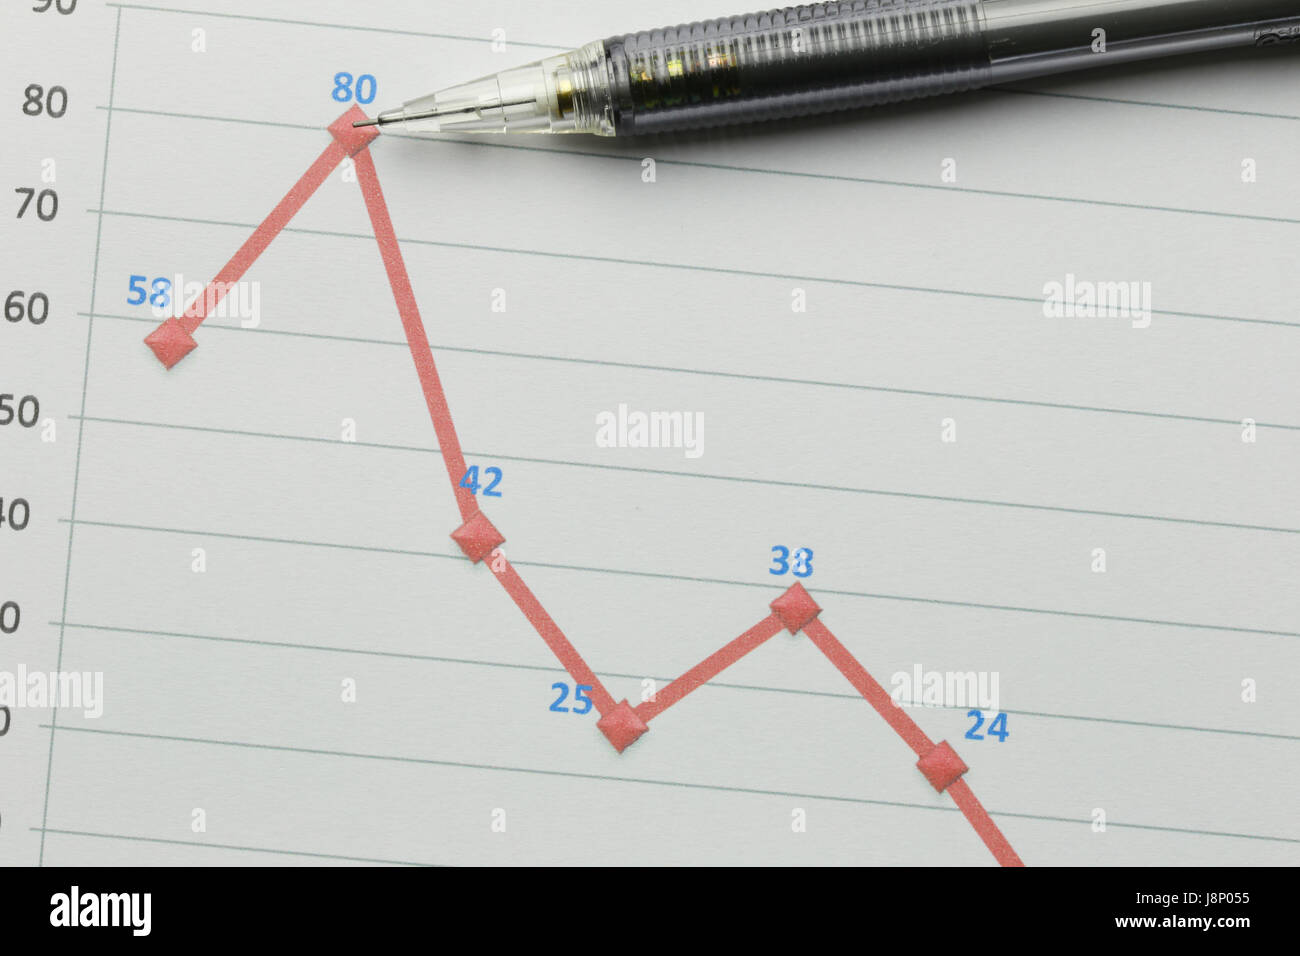 Black pen placed on business graph paper in concept of profitability and analysis of business information. Stock Photo